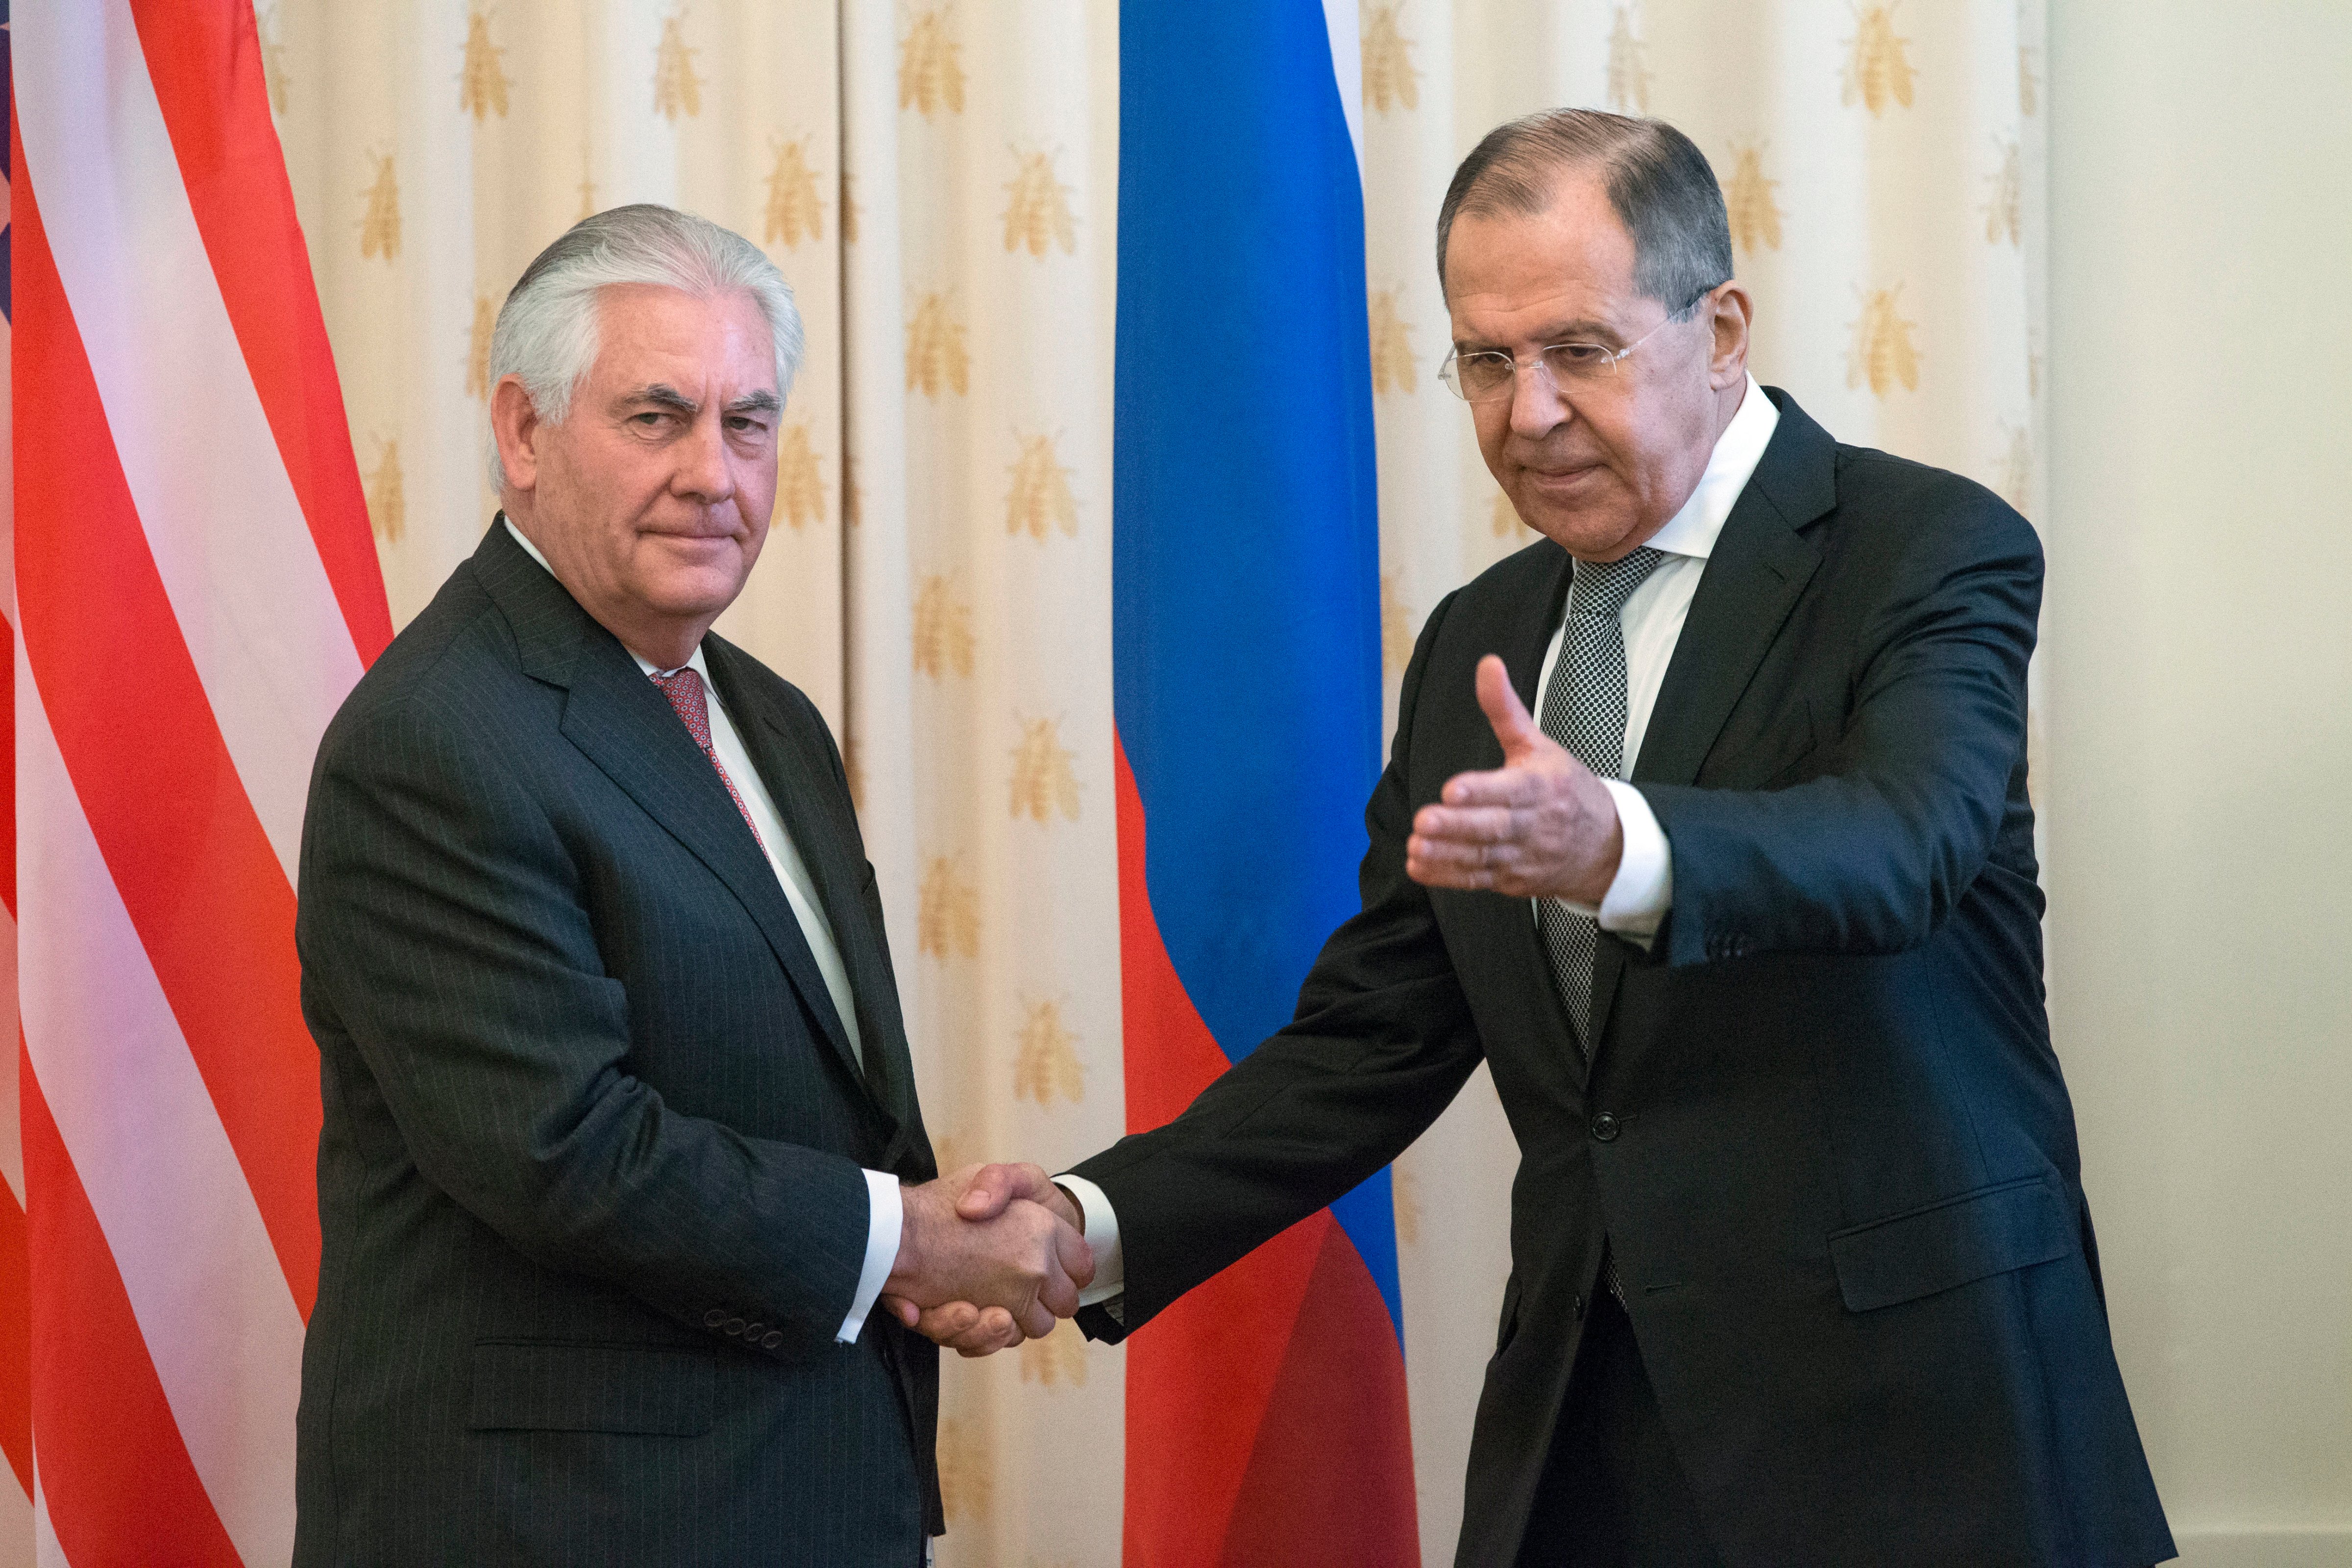 Secretary of State Rex Tillerson and Russian Foreign Minister Sergey Lavrov, shake hands prior to their talks in Moscow, Russia, April 12, 2017. (Alexander Zemlianichenko—AP)